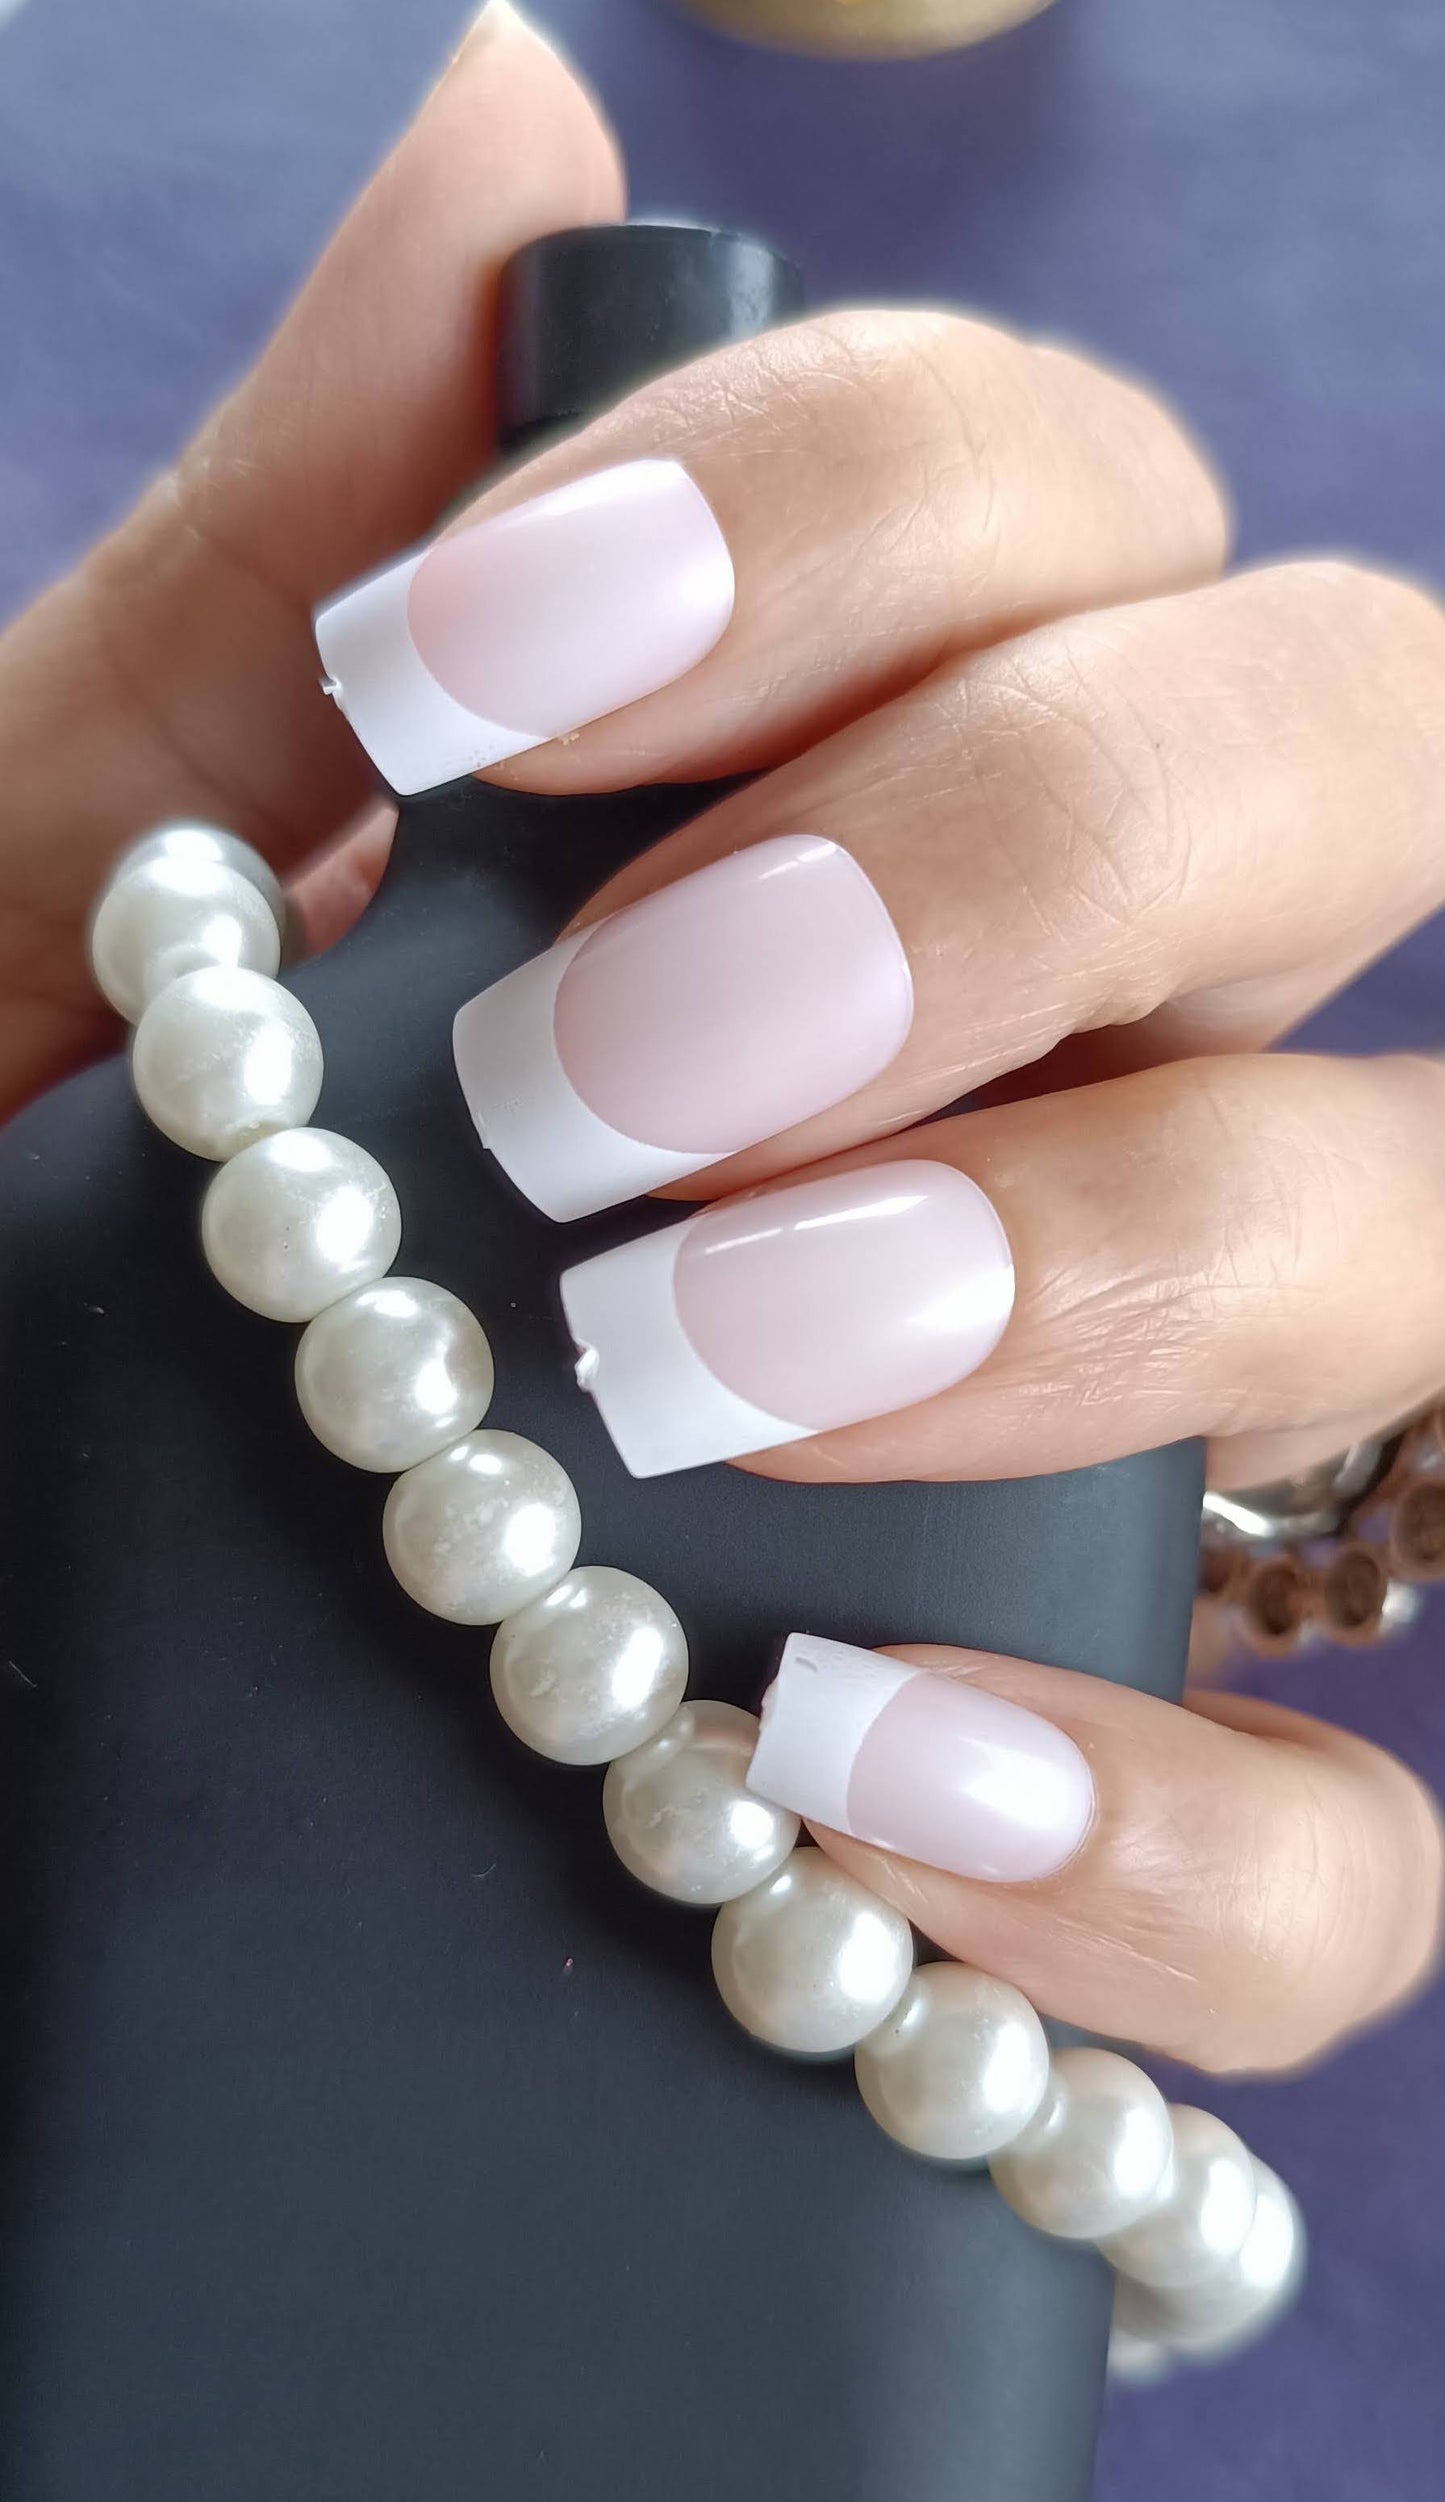 How to Pick the Best Nail Shape for You